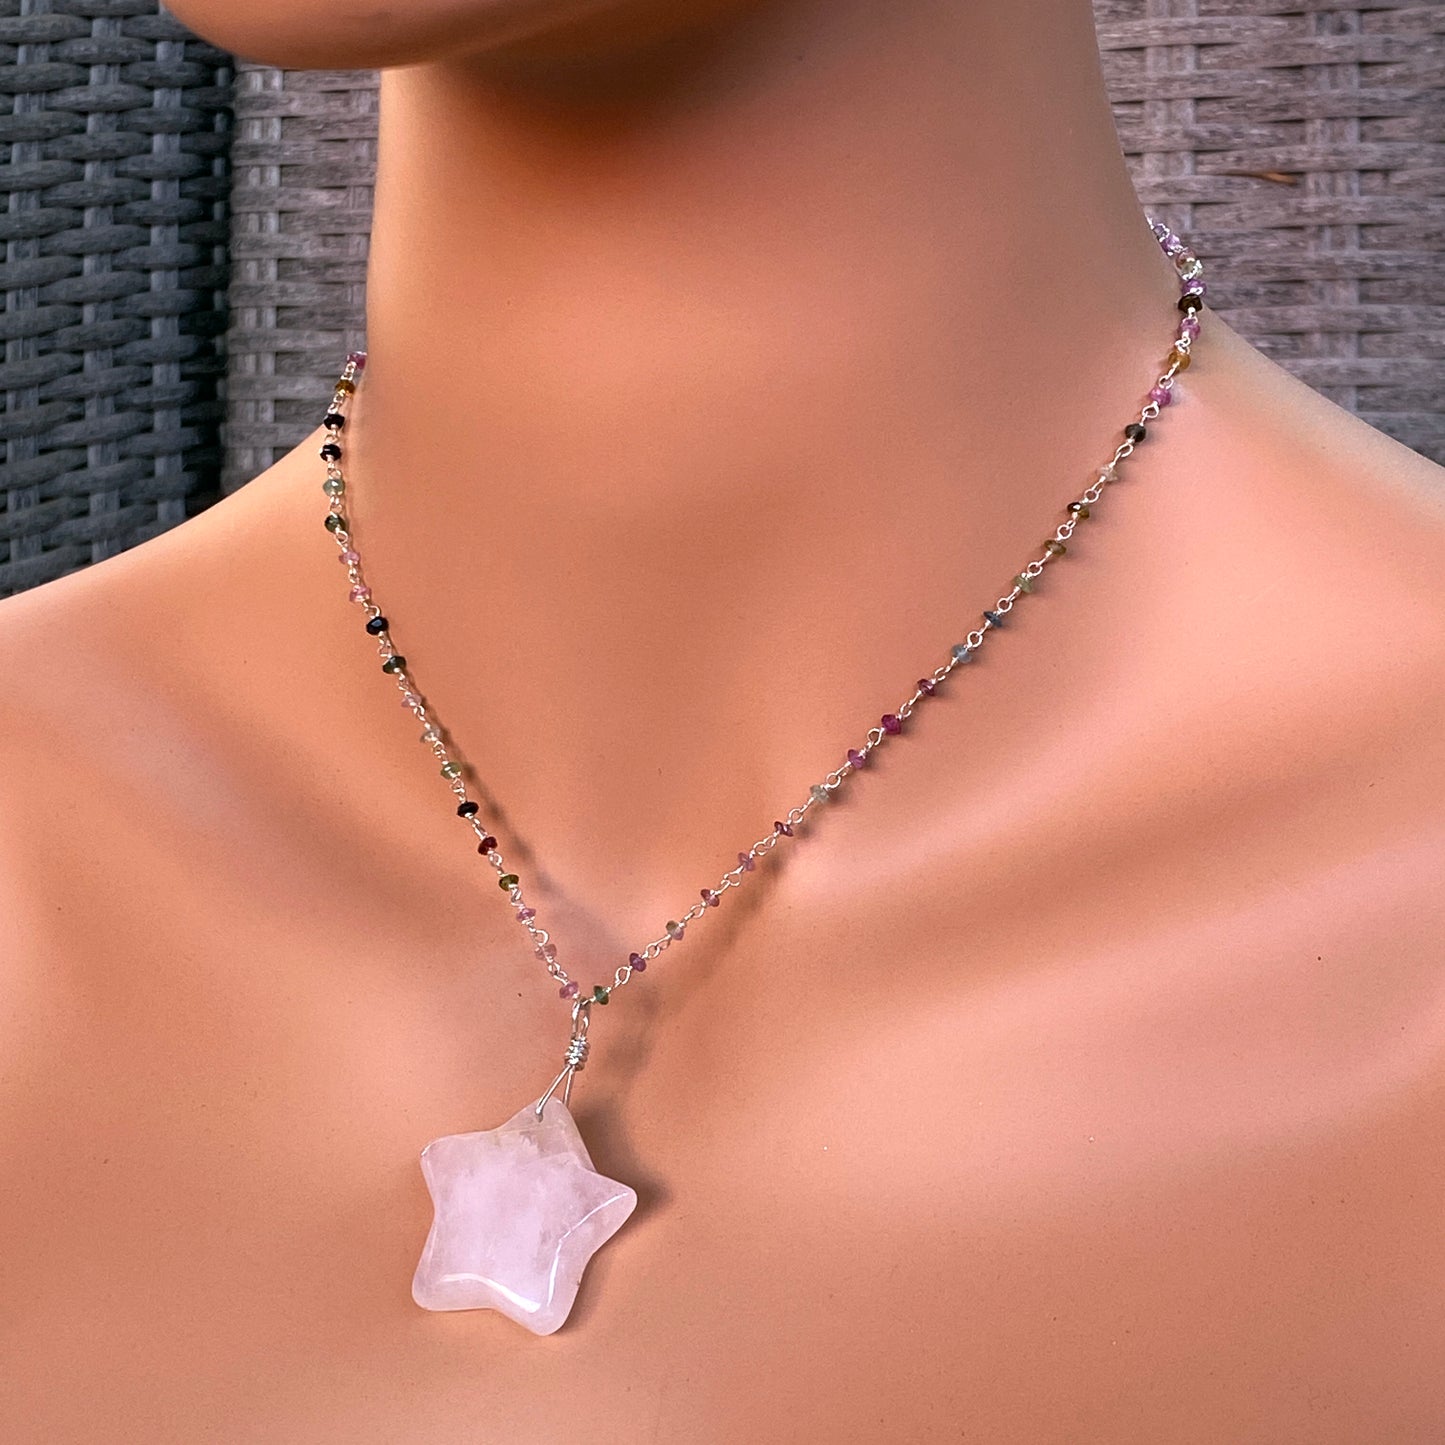 Rose Quartz Star on Mixed Tourmaline and Sterling Silver